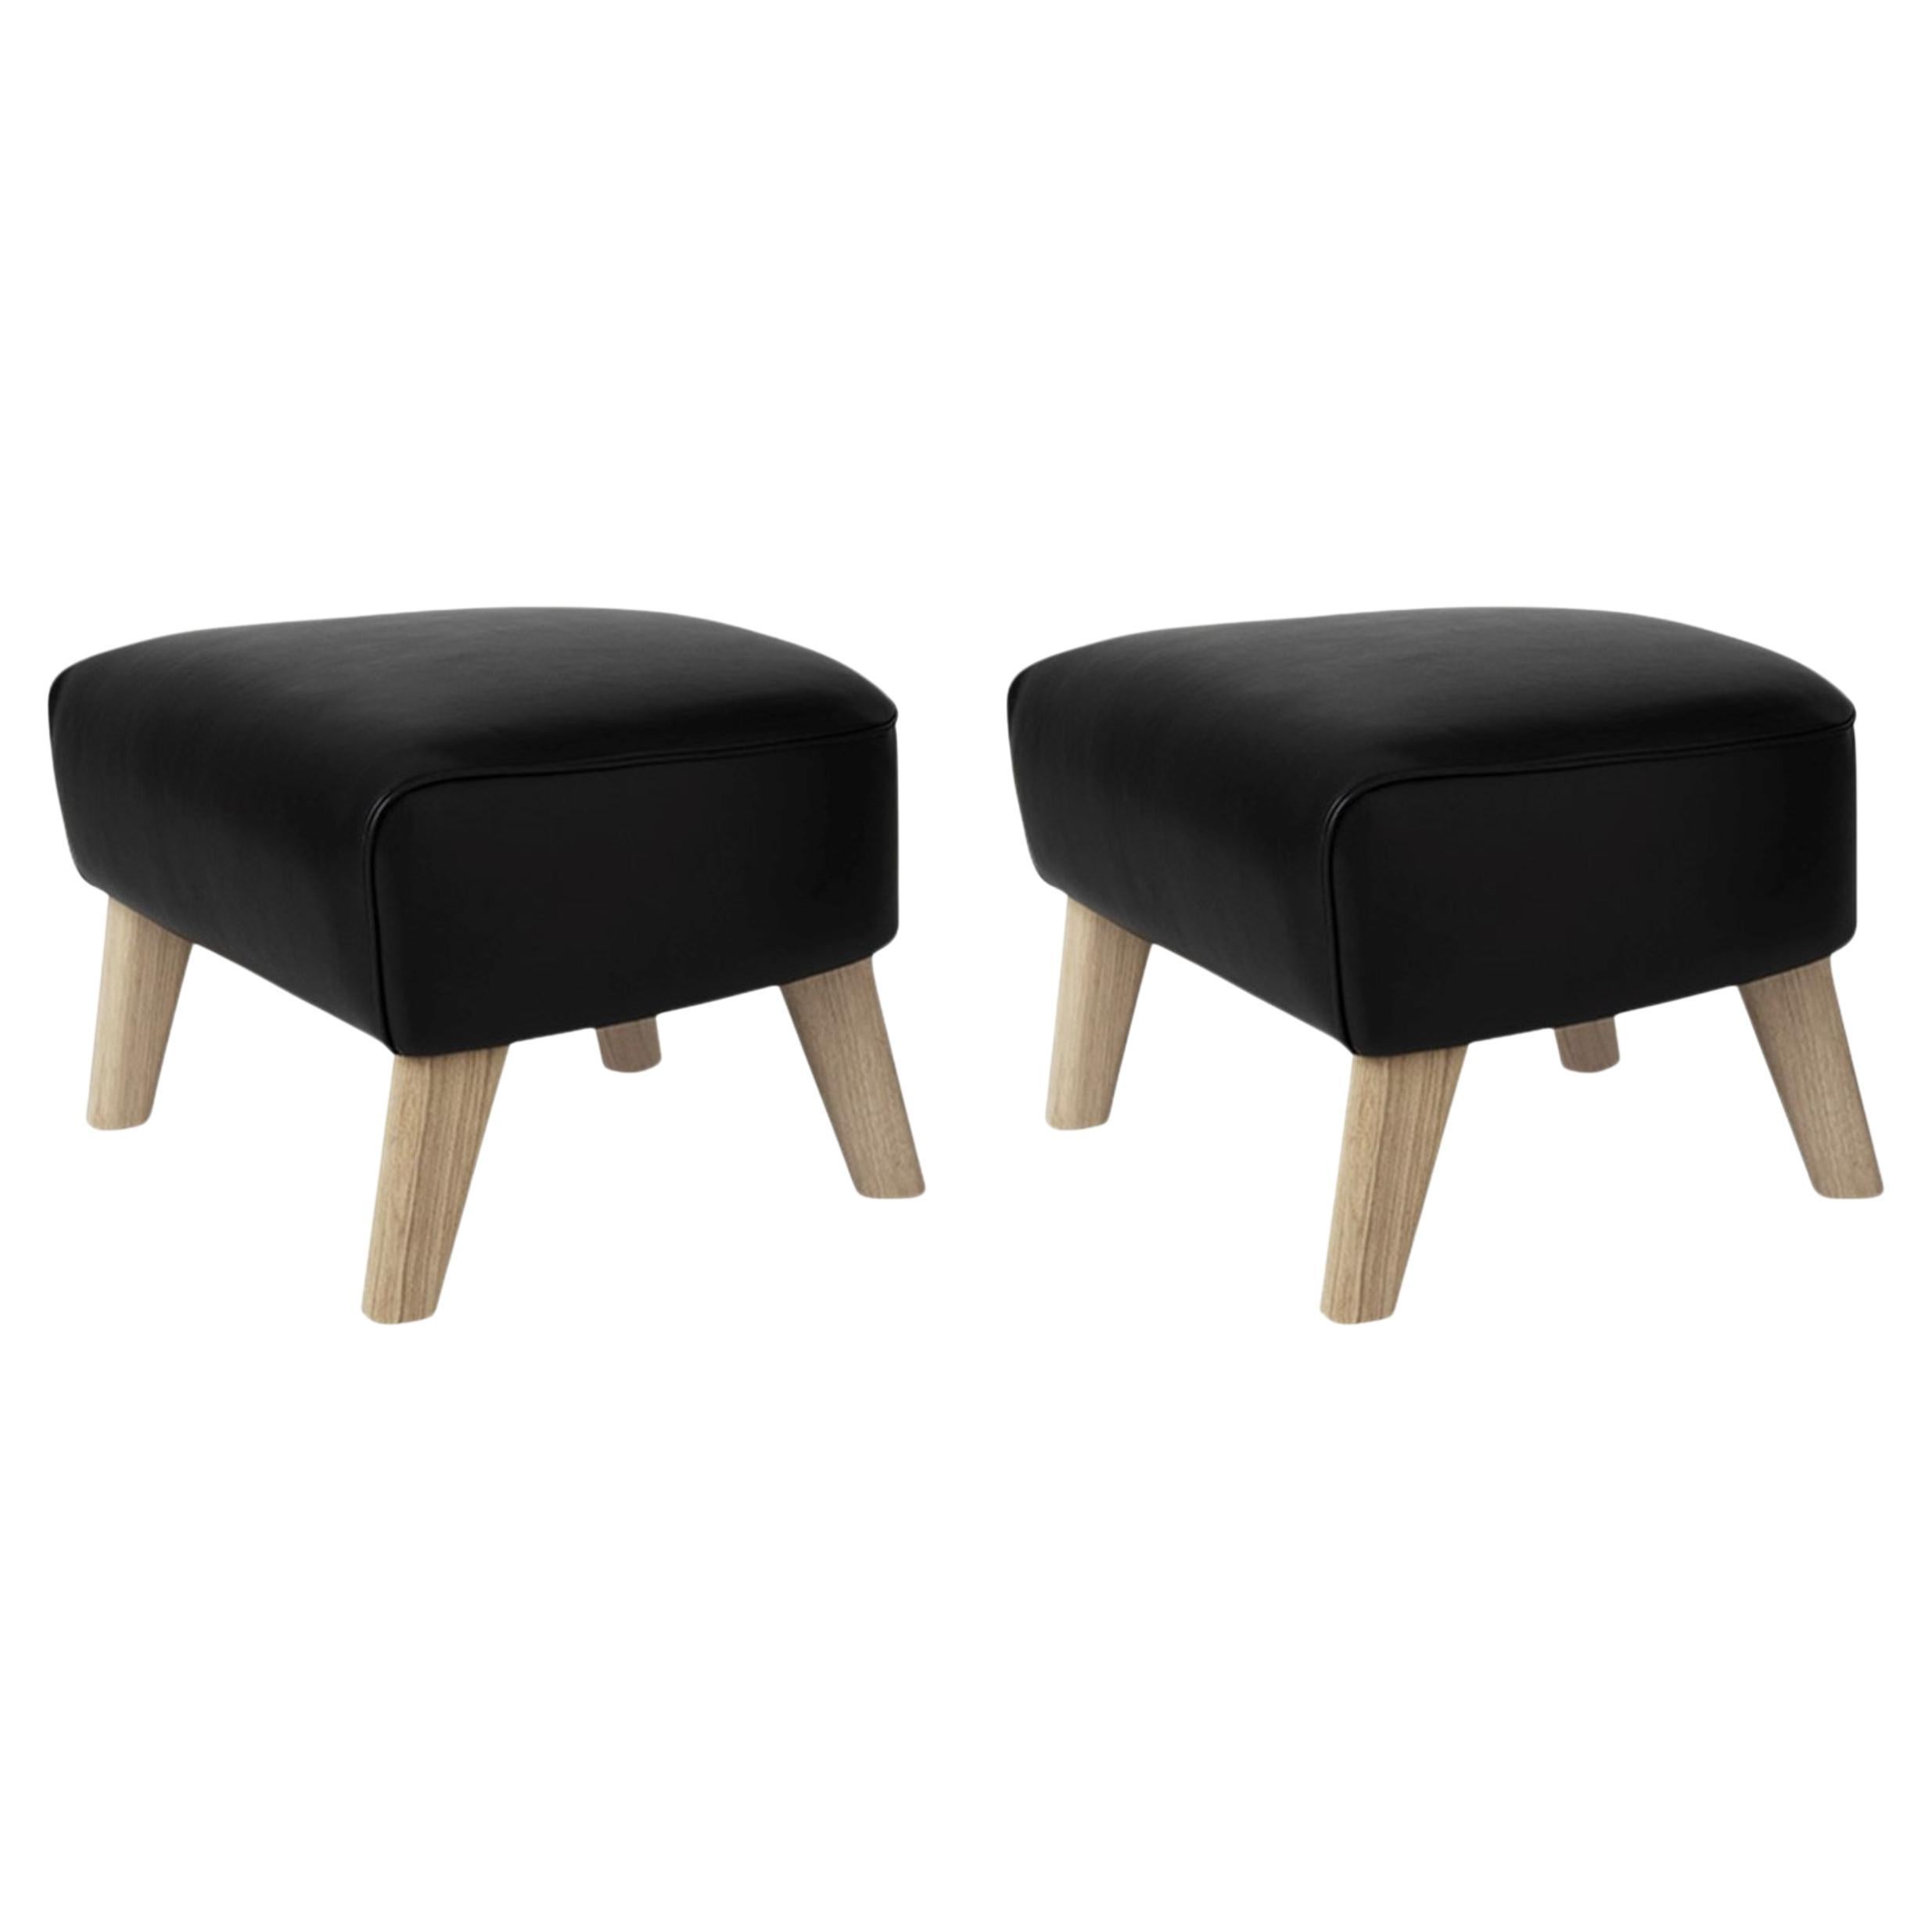 Set of 2 Black Leather and Natural Oak My Own Chair Footstools by Lassen For Sale